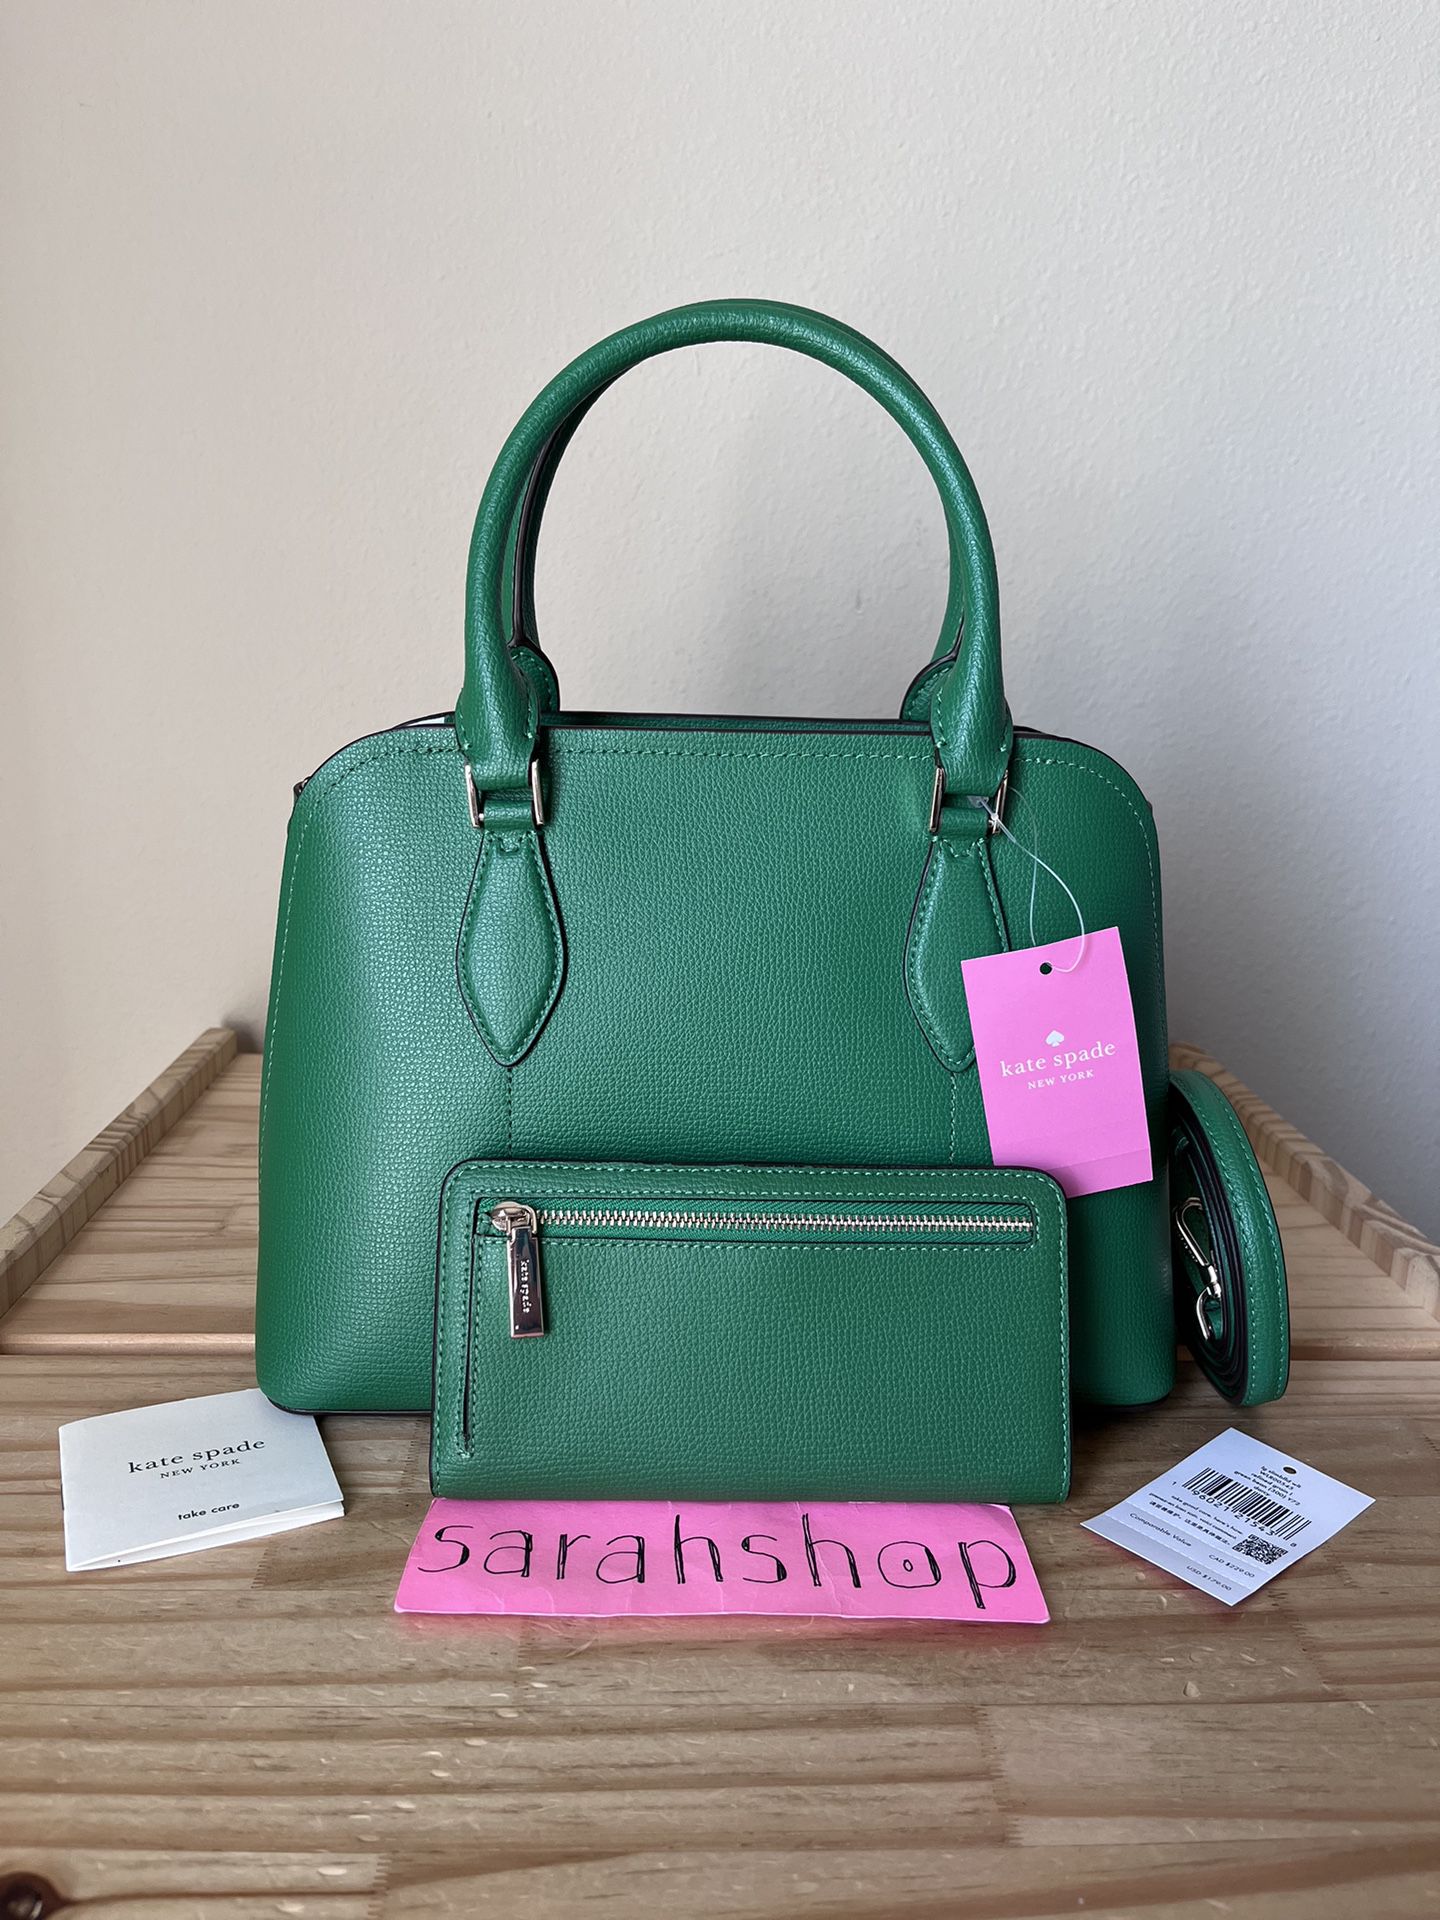 Off White Purse for Sale in Winter Park, FL - OfferUp